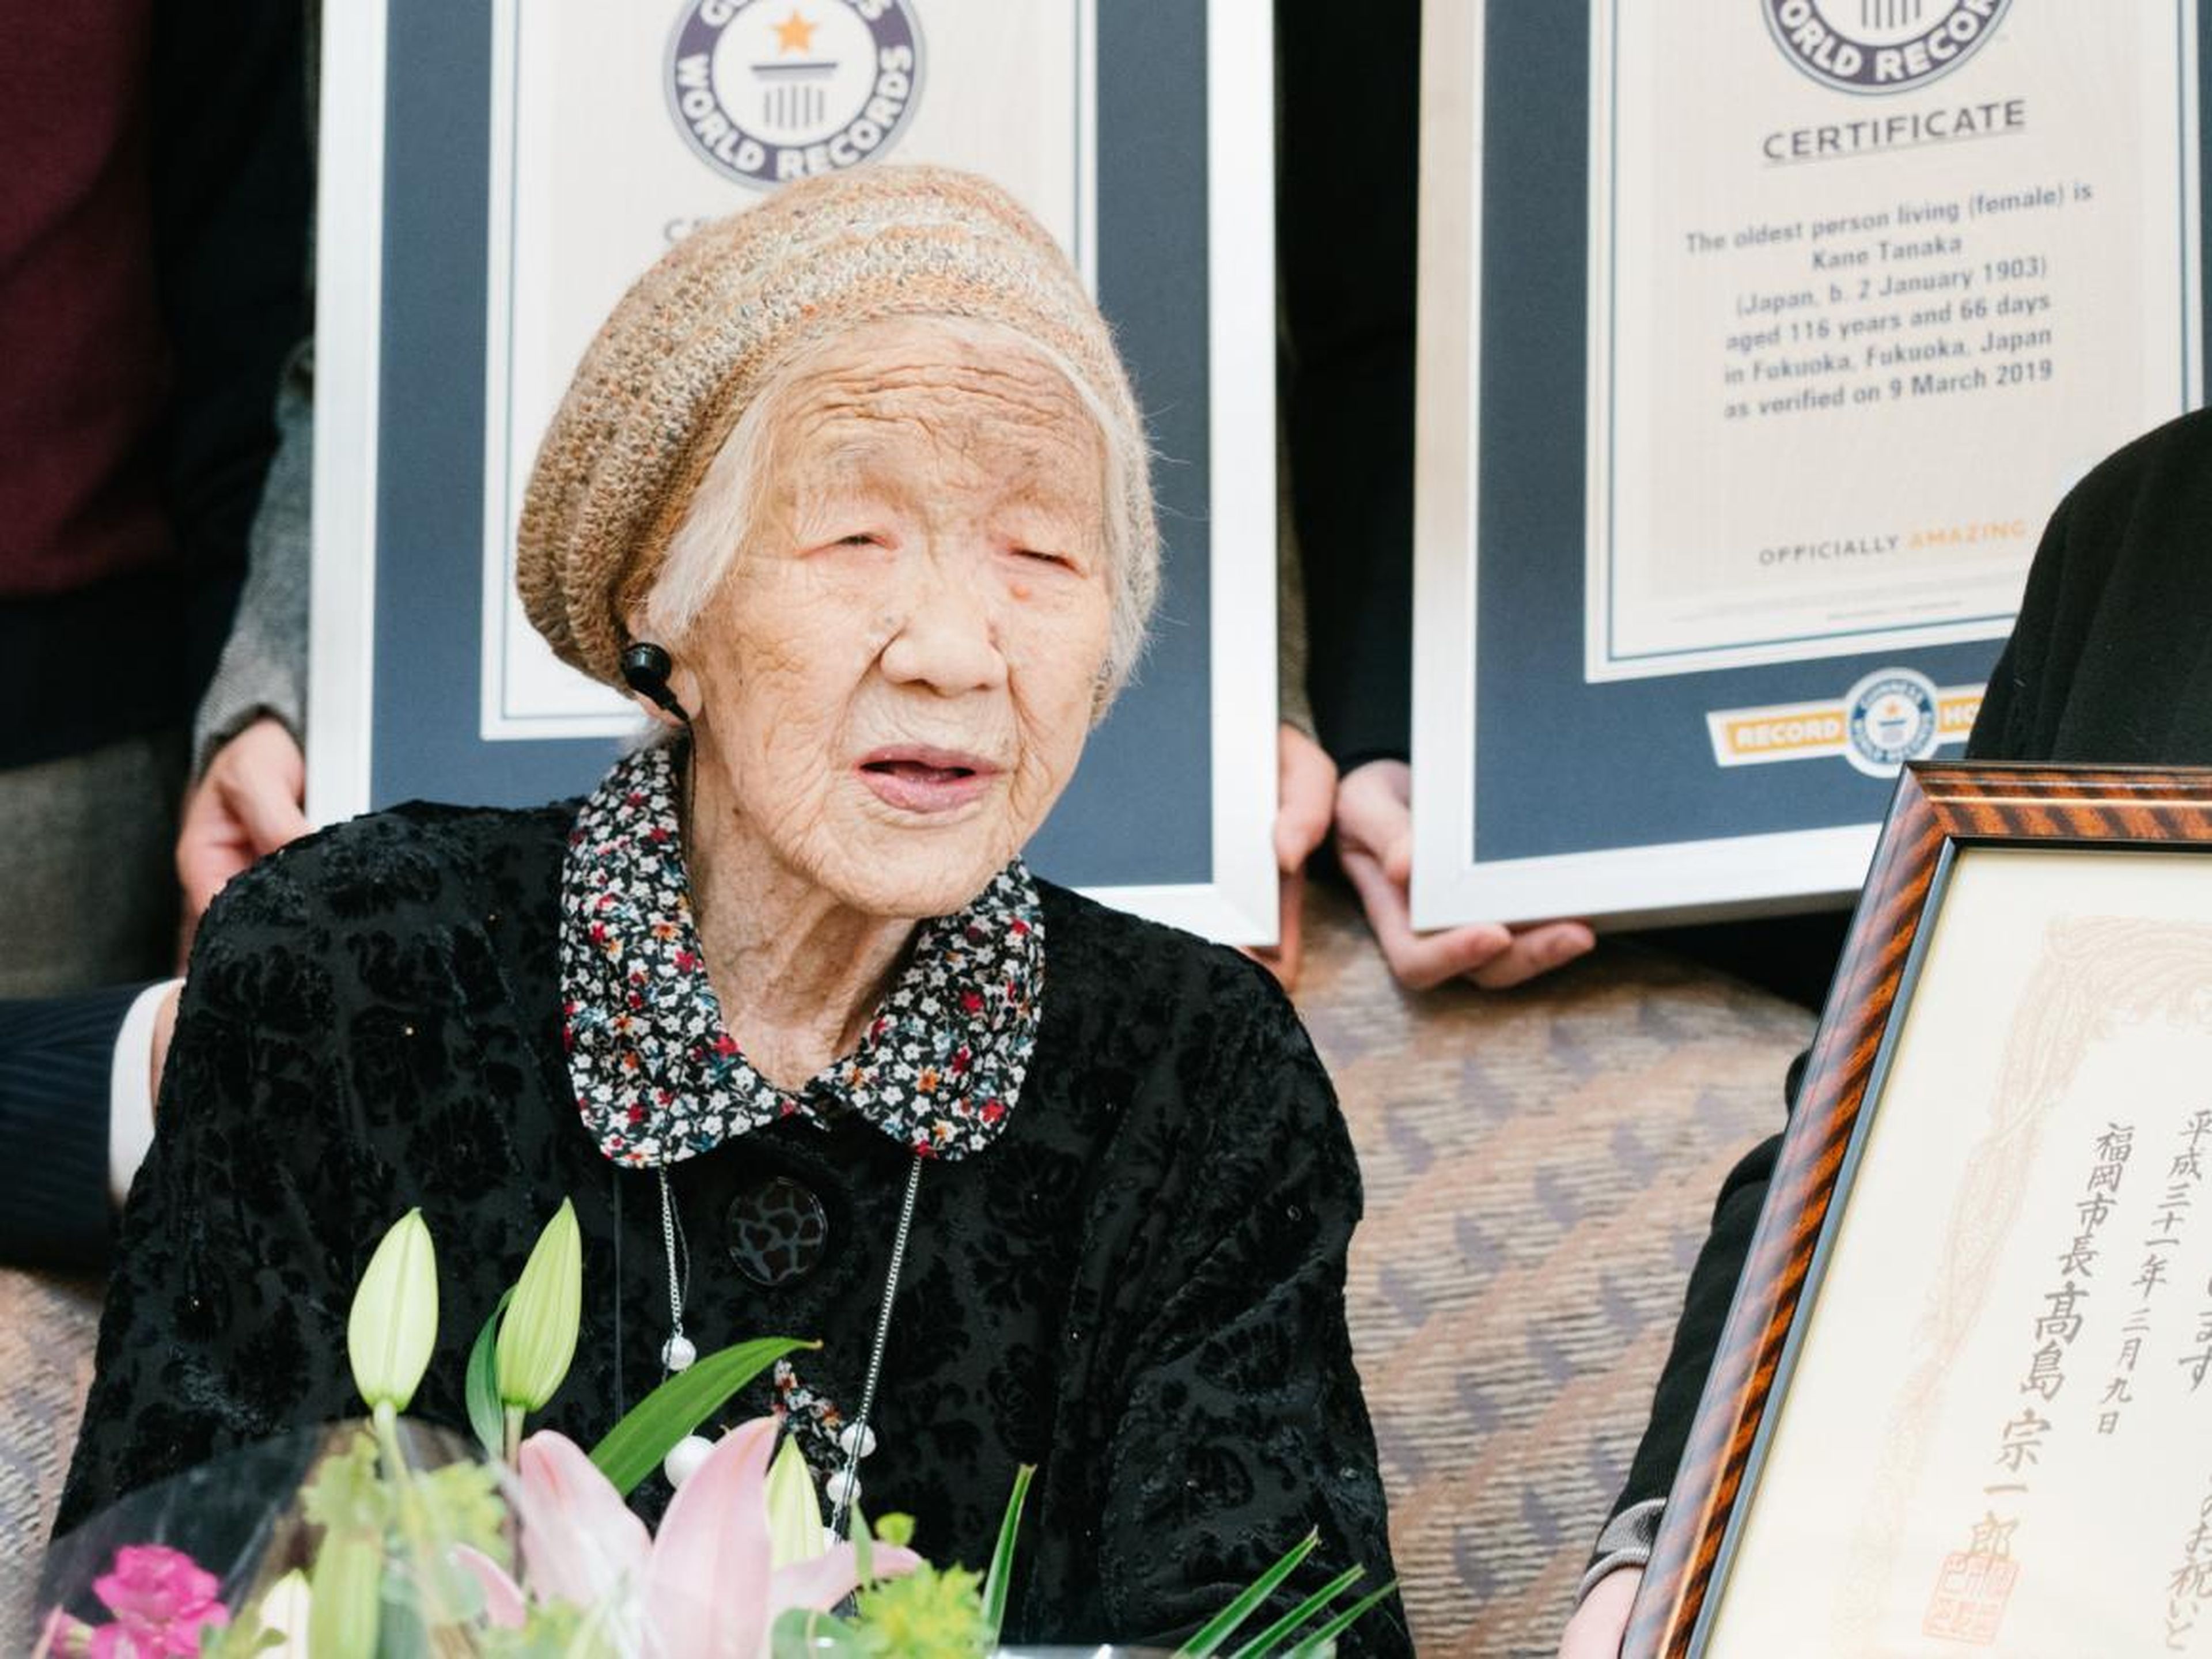 116-year-old Japanese woman Kane Tanaka holds a Guinness World Records certificate naming her the world's oldest person living during a ceremony in Fukuoka, Japan.